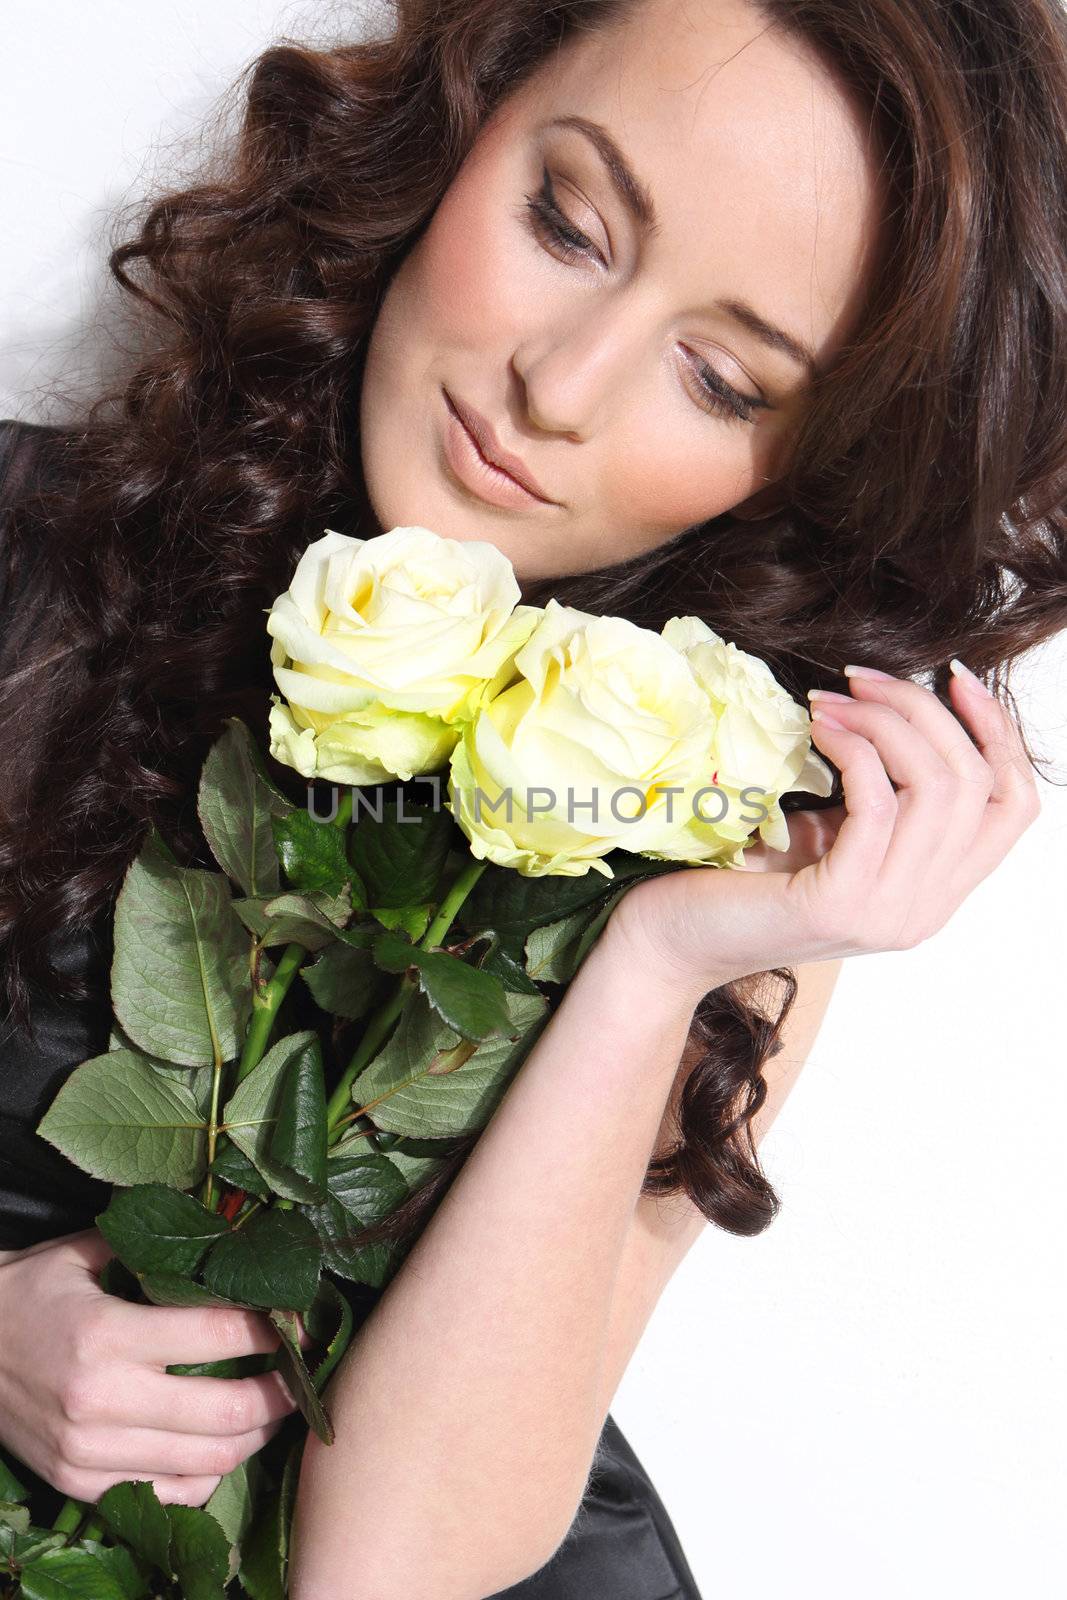 Photo of beautiful woman with white roses